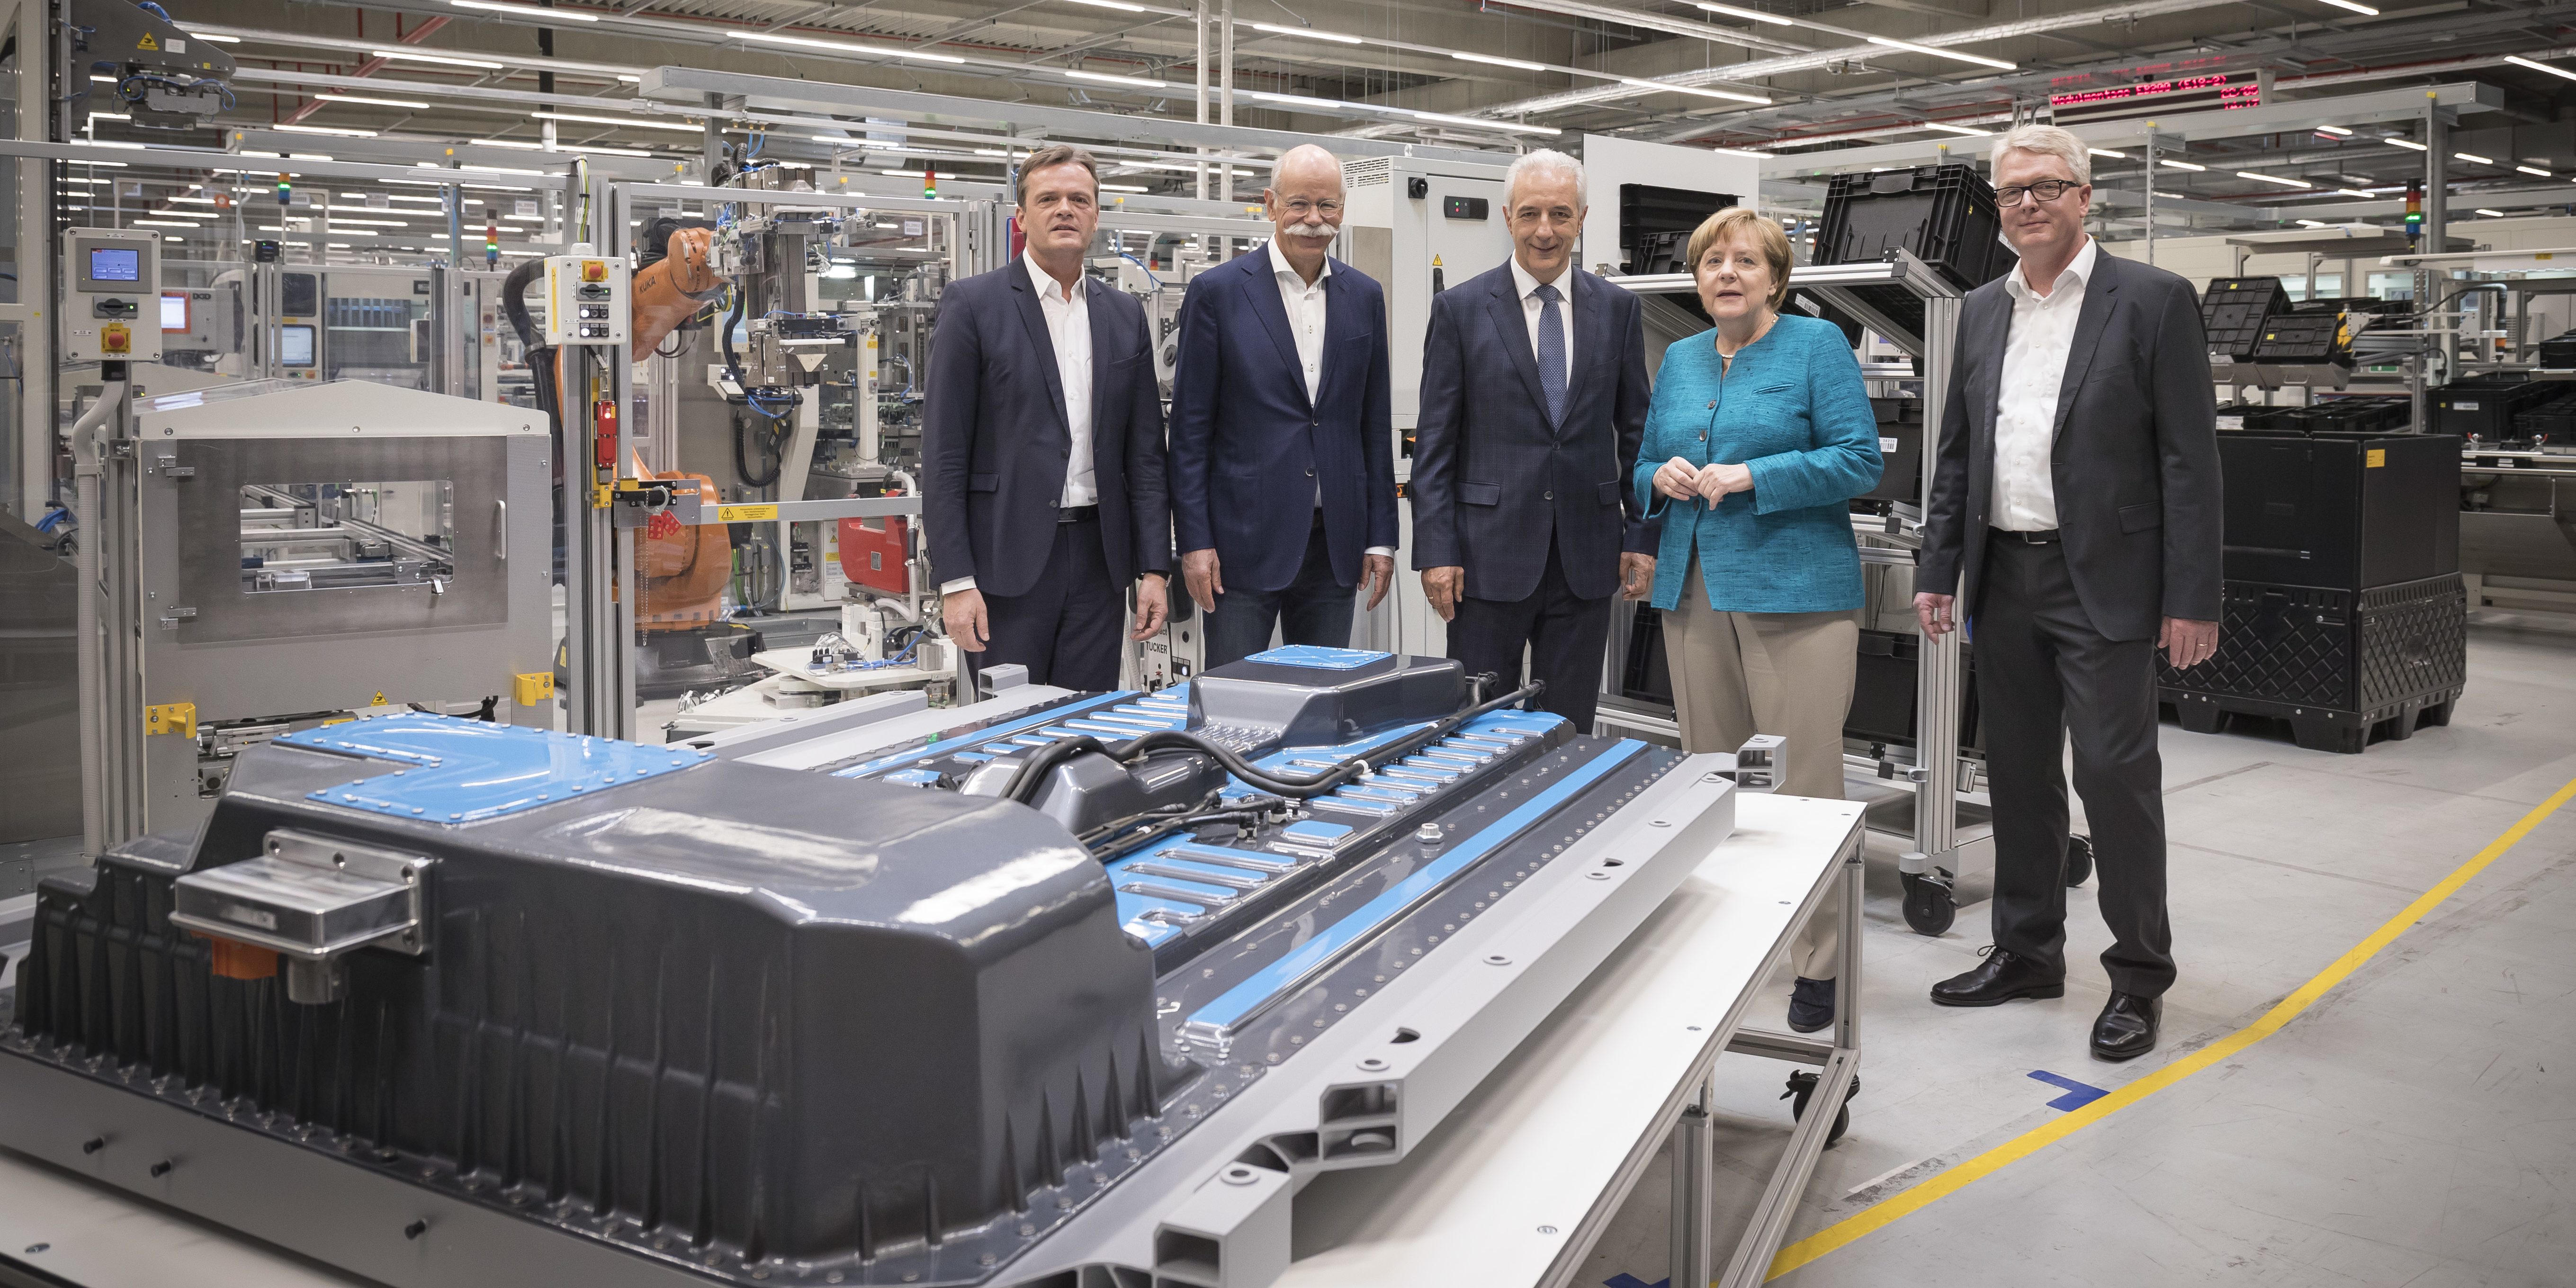 Daimler unveils its own new battery Gigafactory for electric vehicles